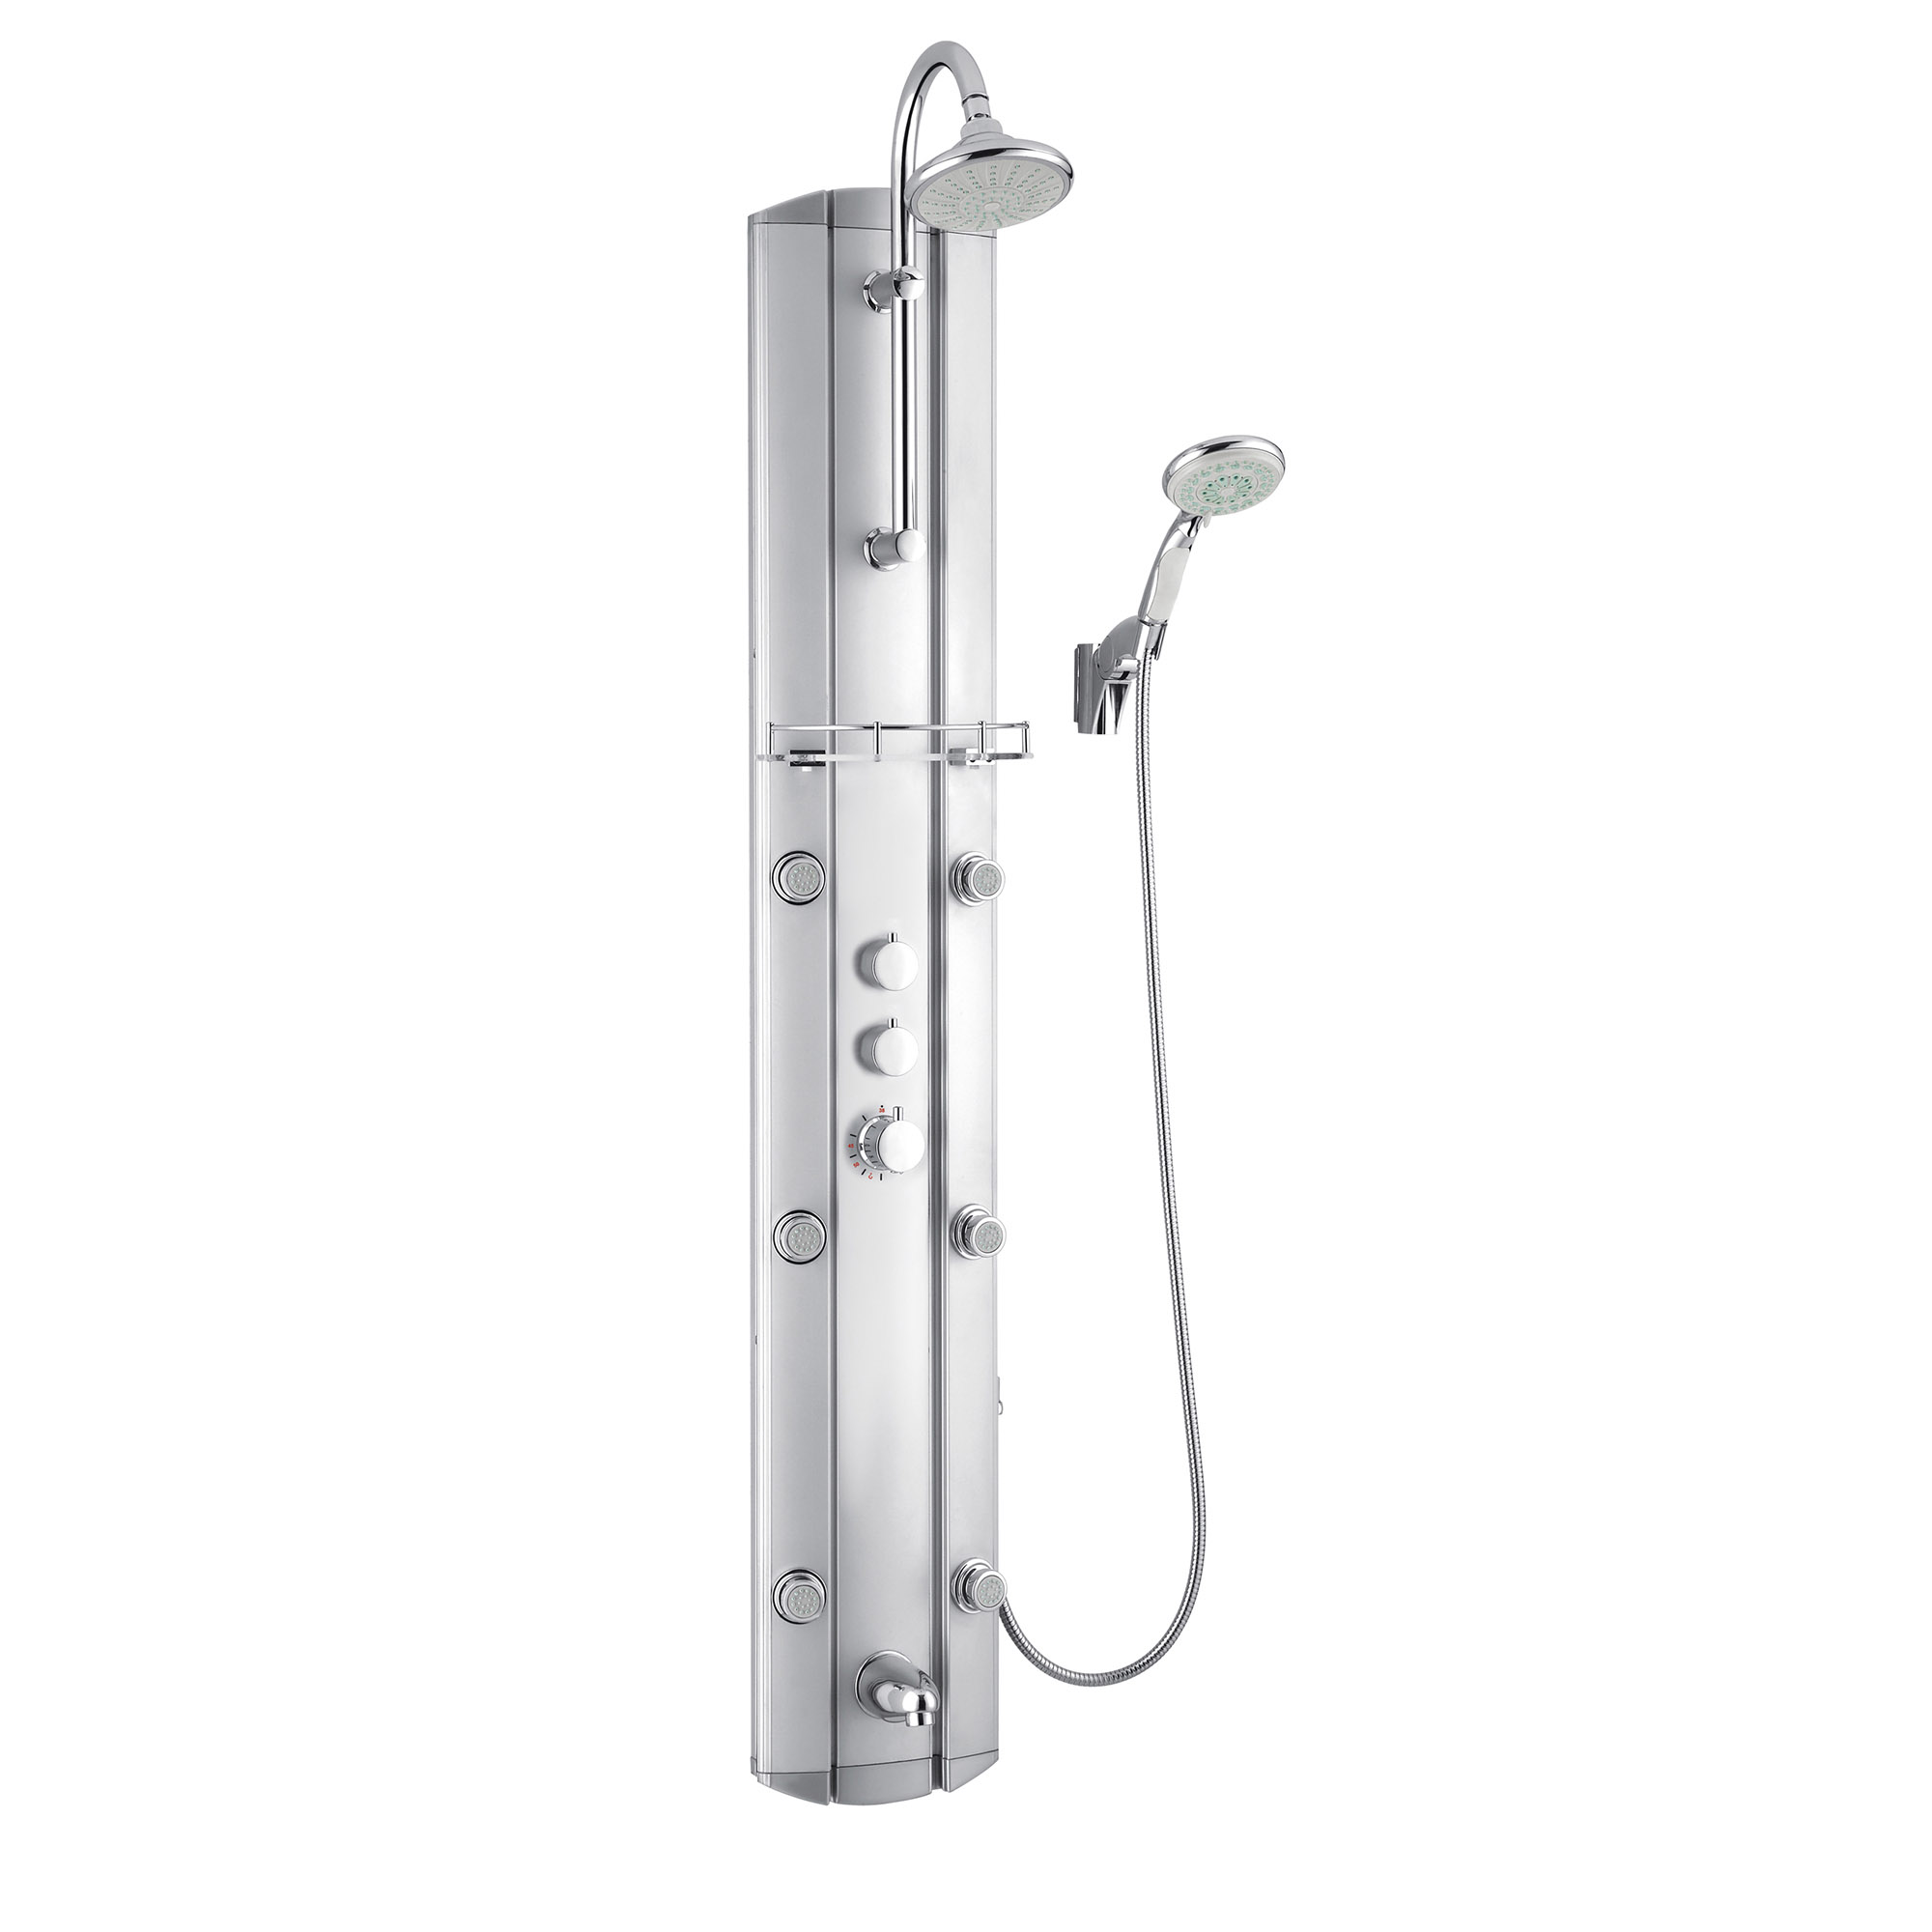 DreamLine Hydrotherapy Shower Column, Anodized Aluminum Body In Satin Finish